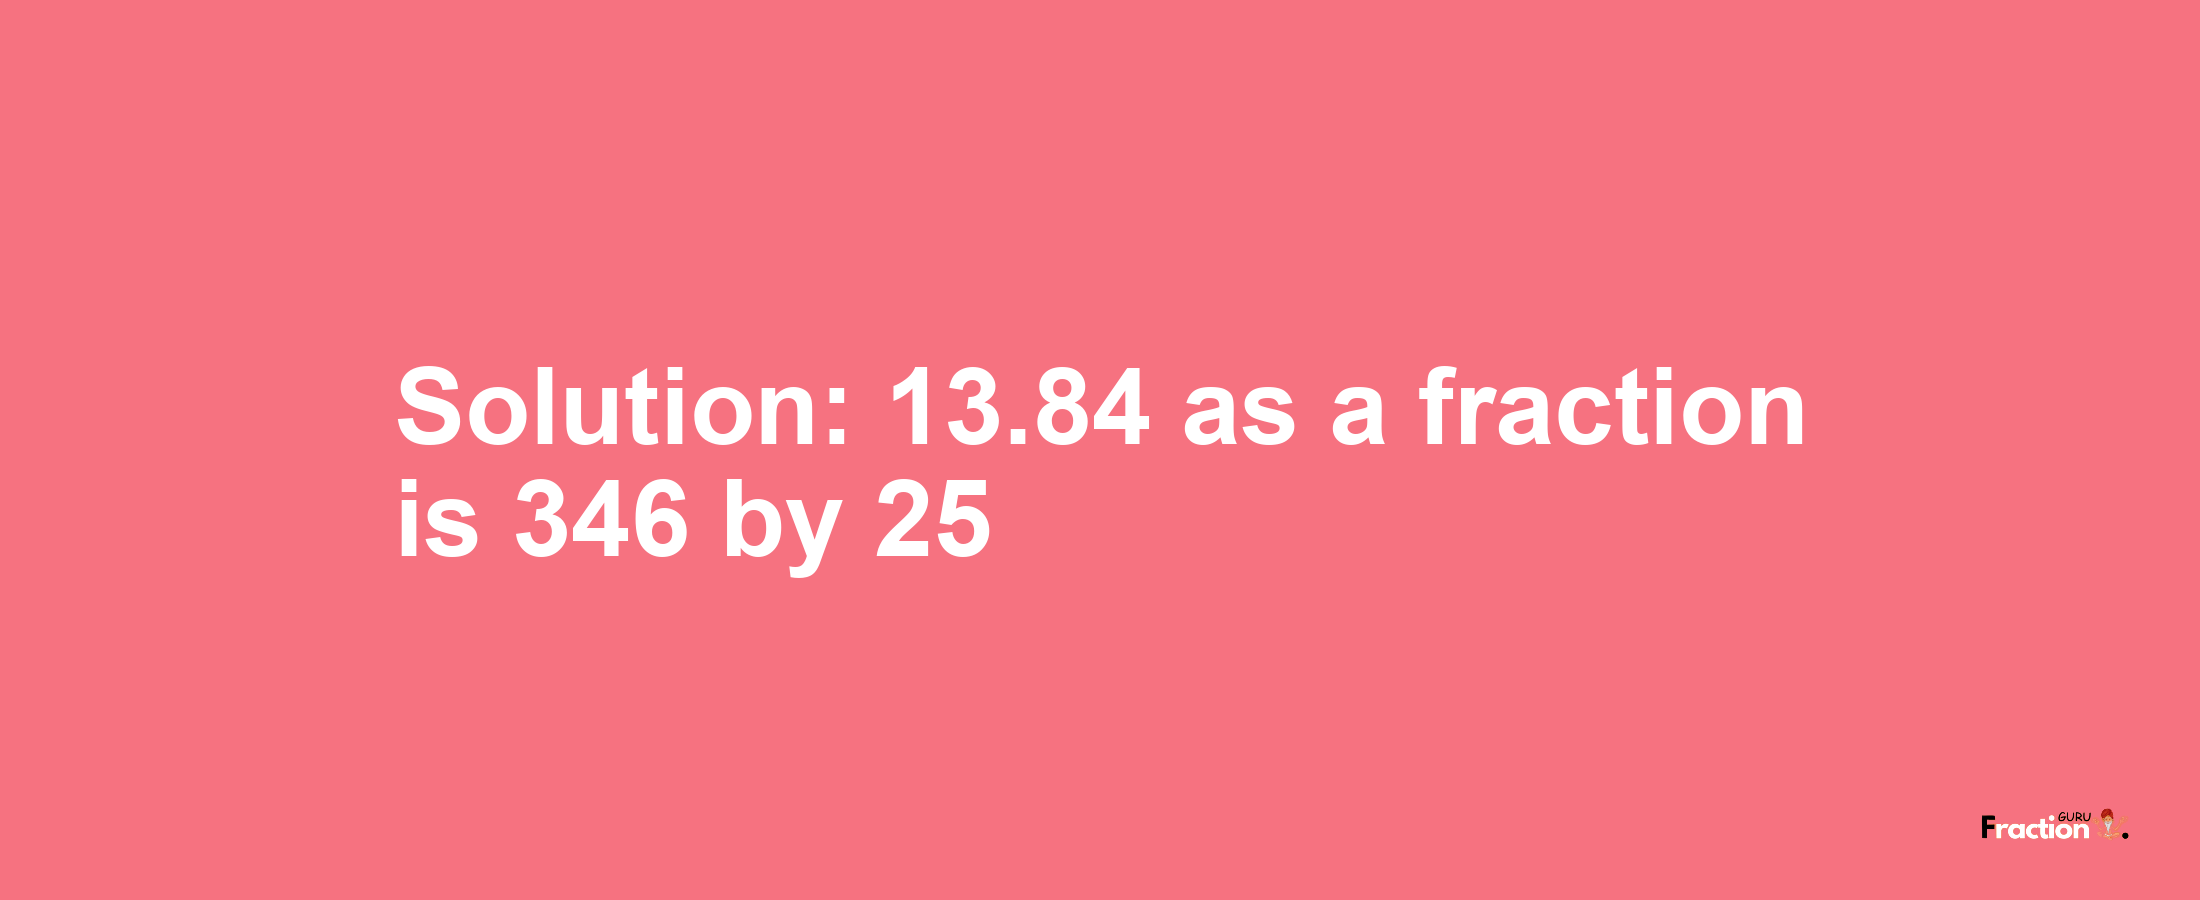 Solution:13.84 as a fraction is 346/25